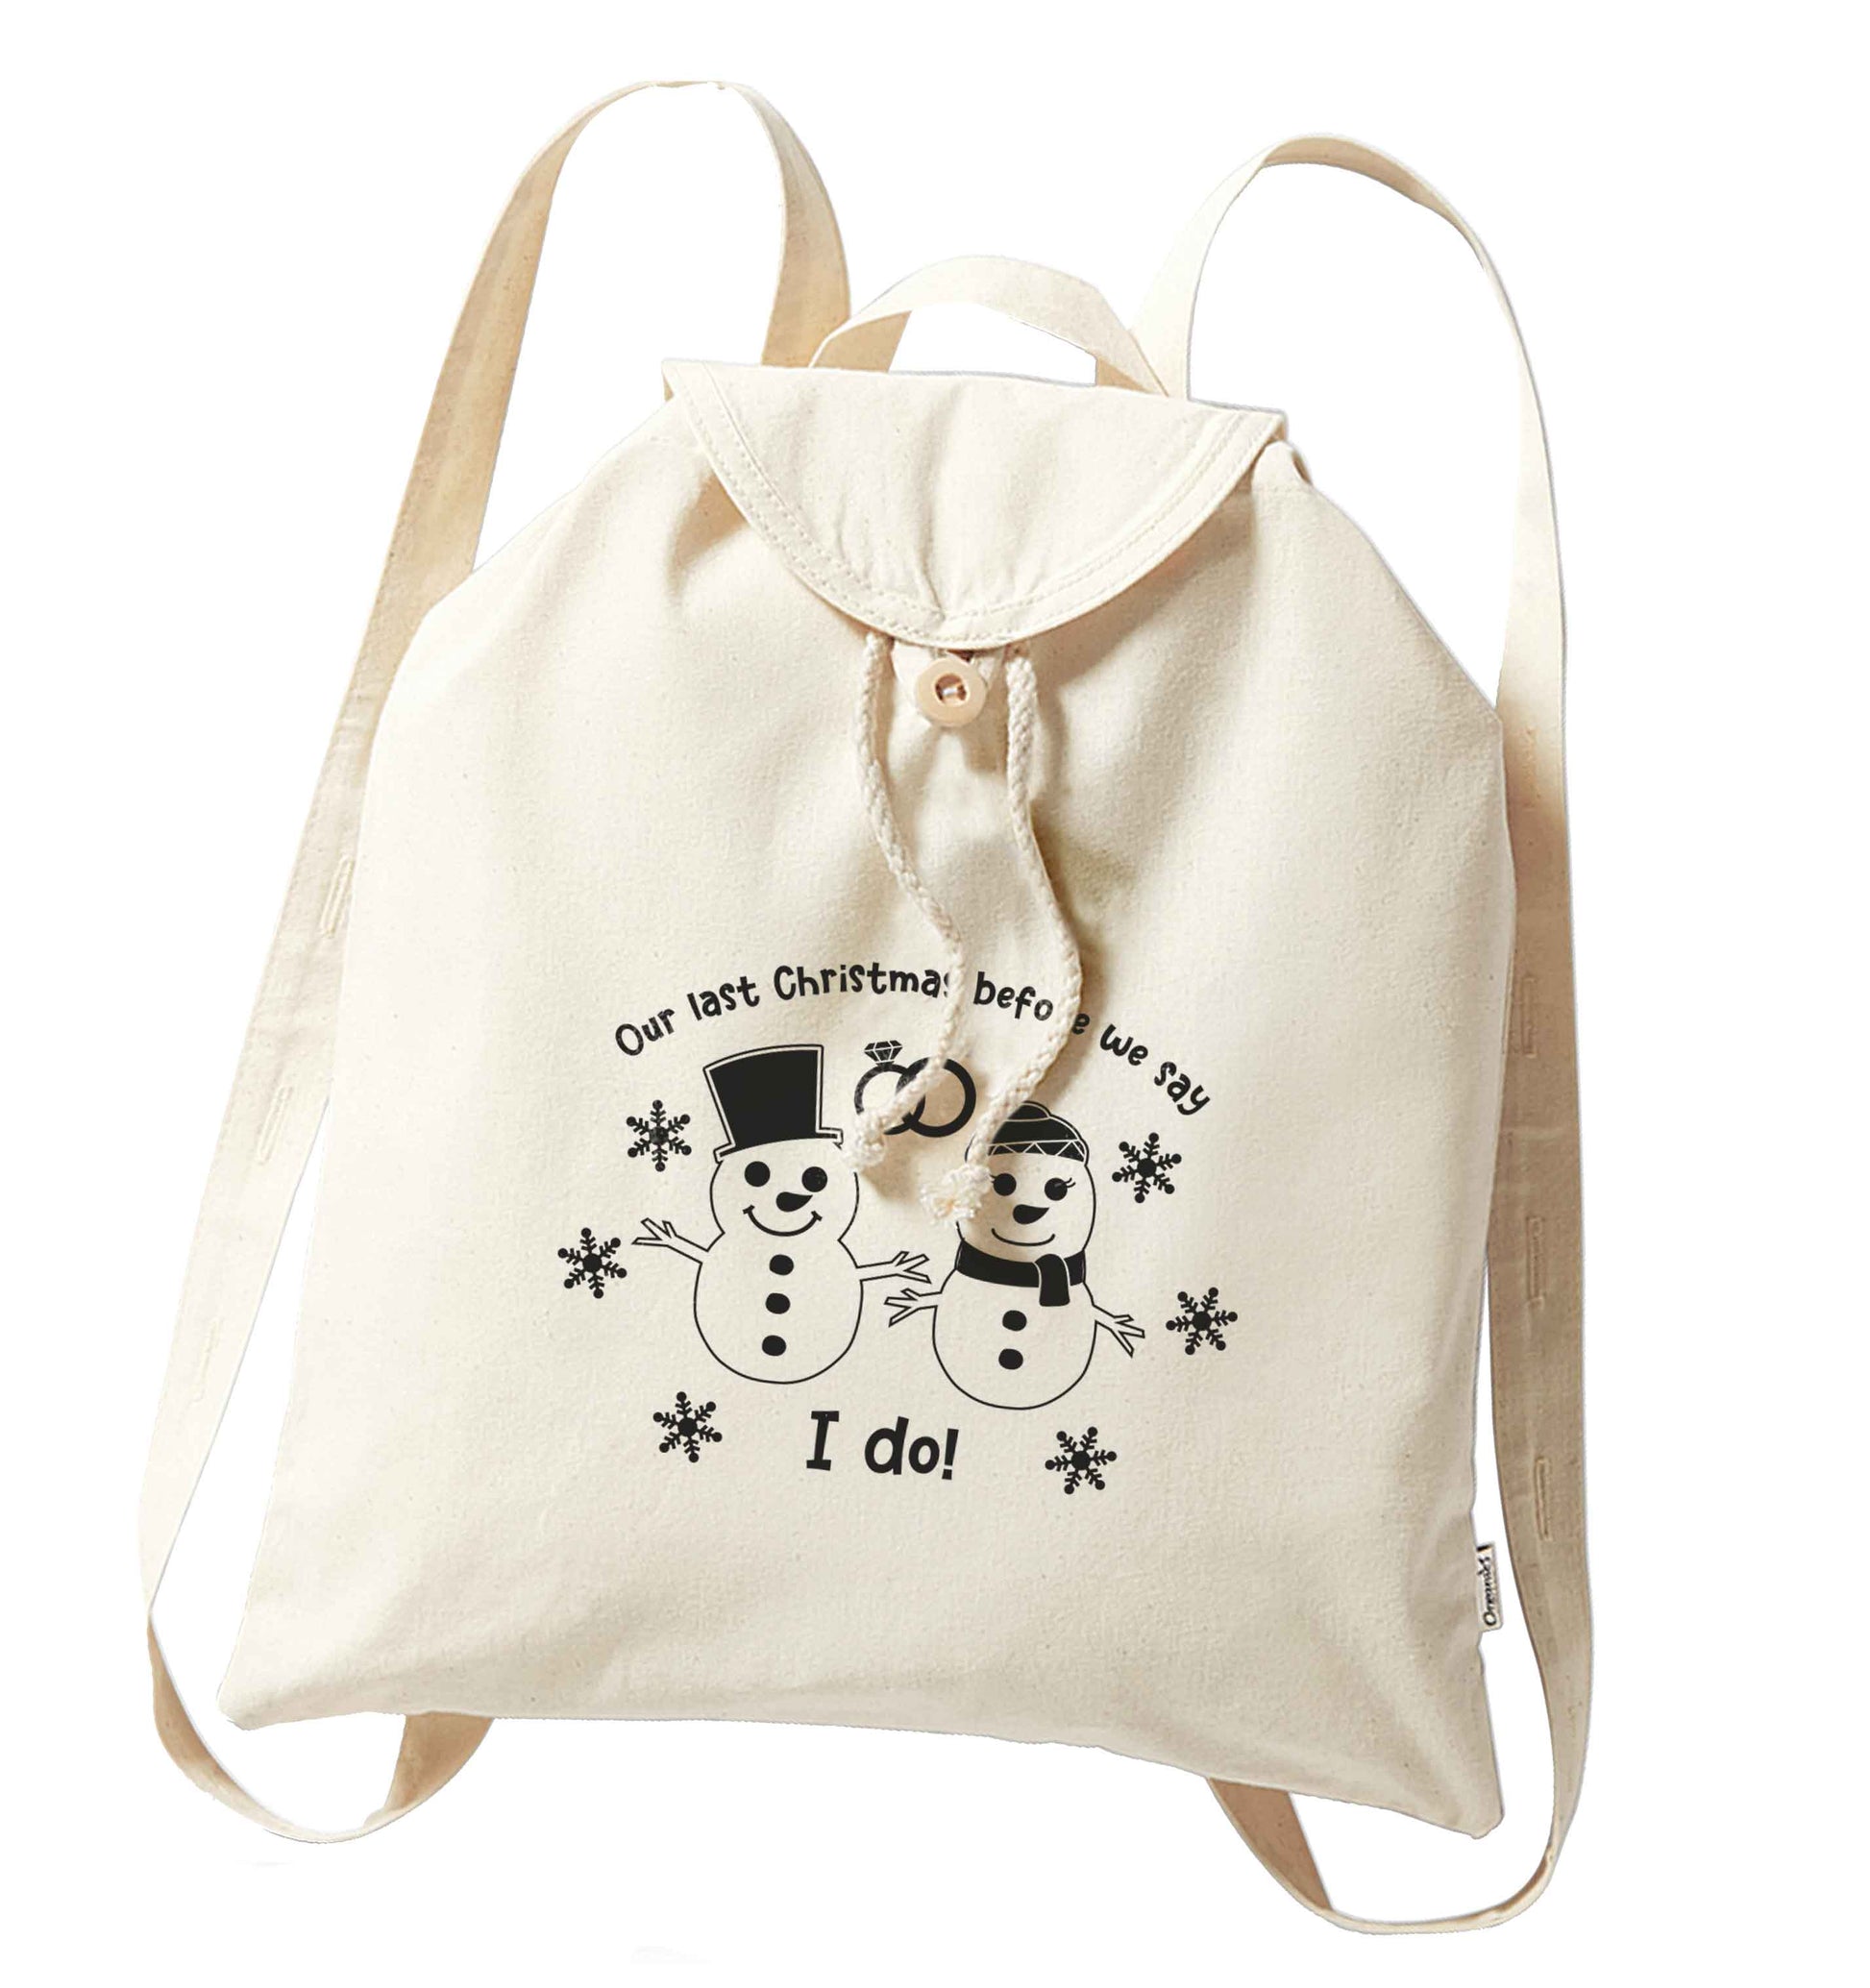 Last Christmas before we say I do organic cotton backpack tote with wooden buttons in natural